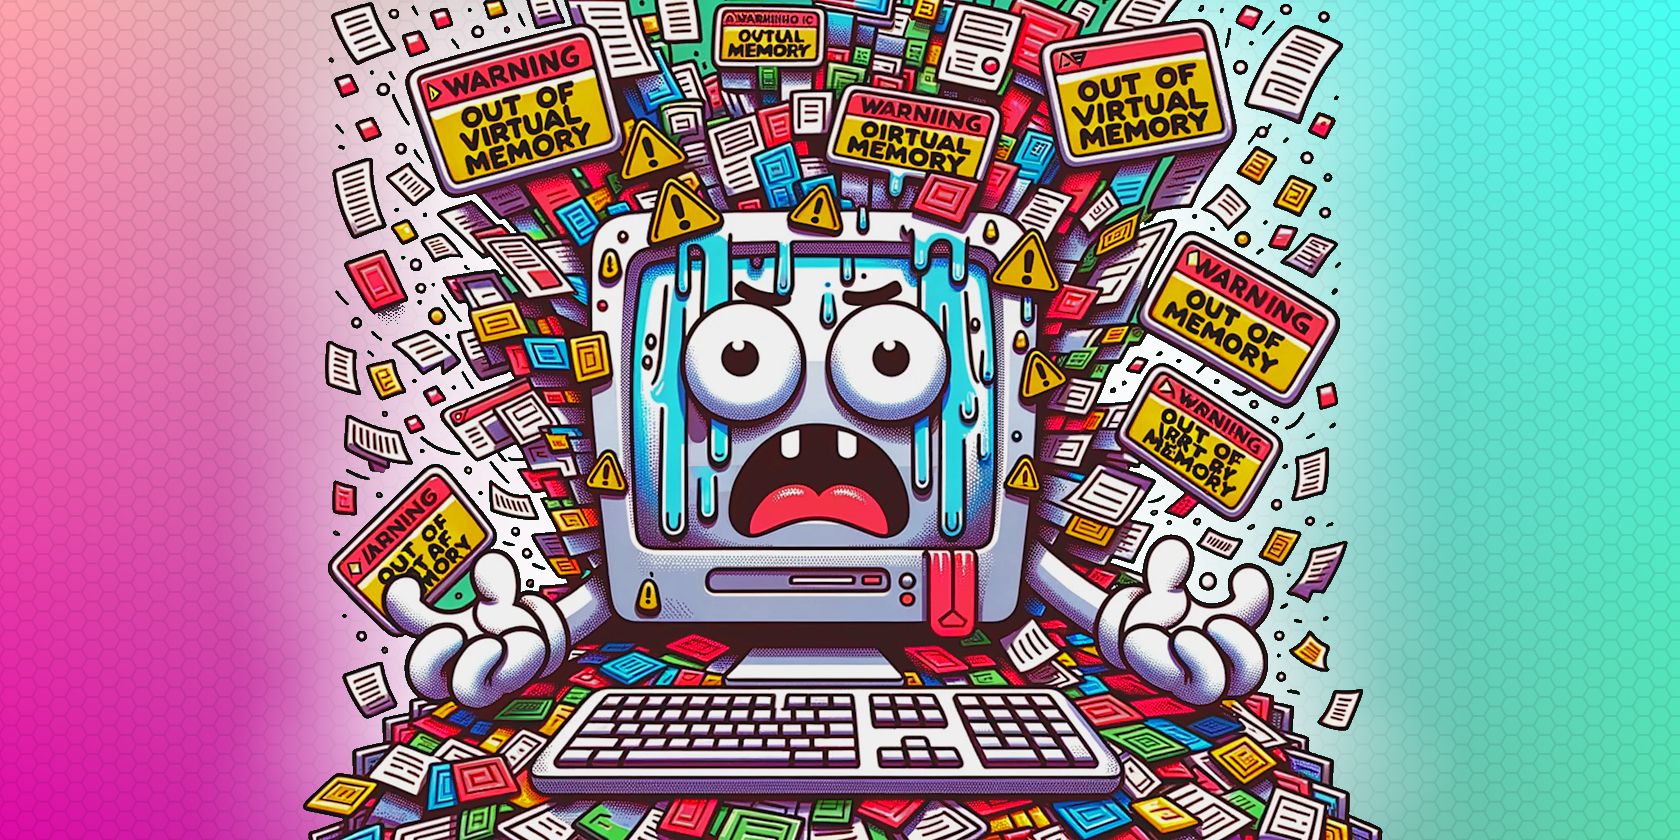 cartoon style computer showing virtual memory warnings on colorful background